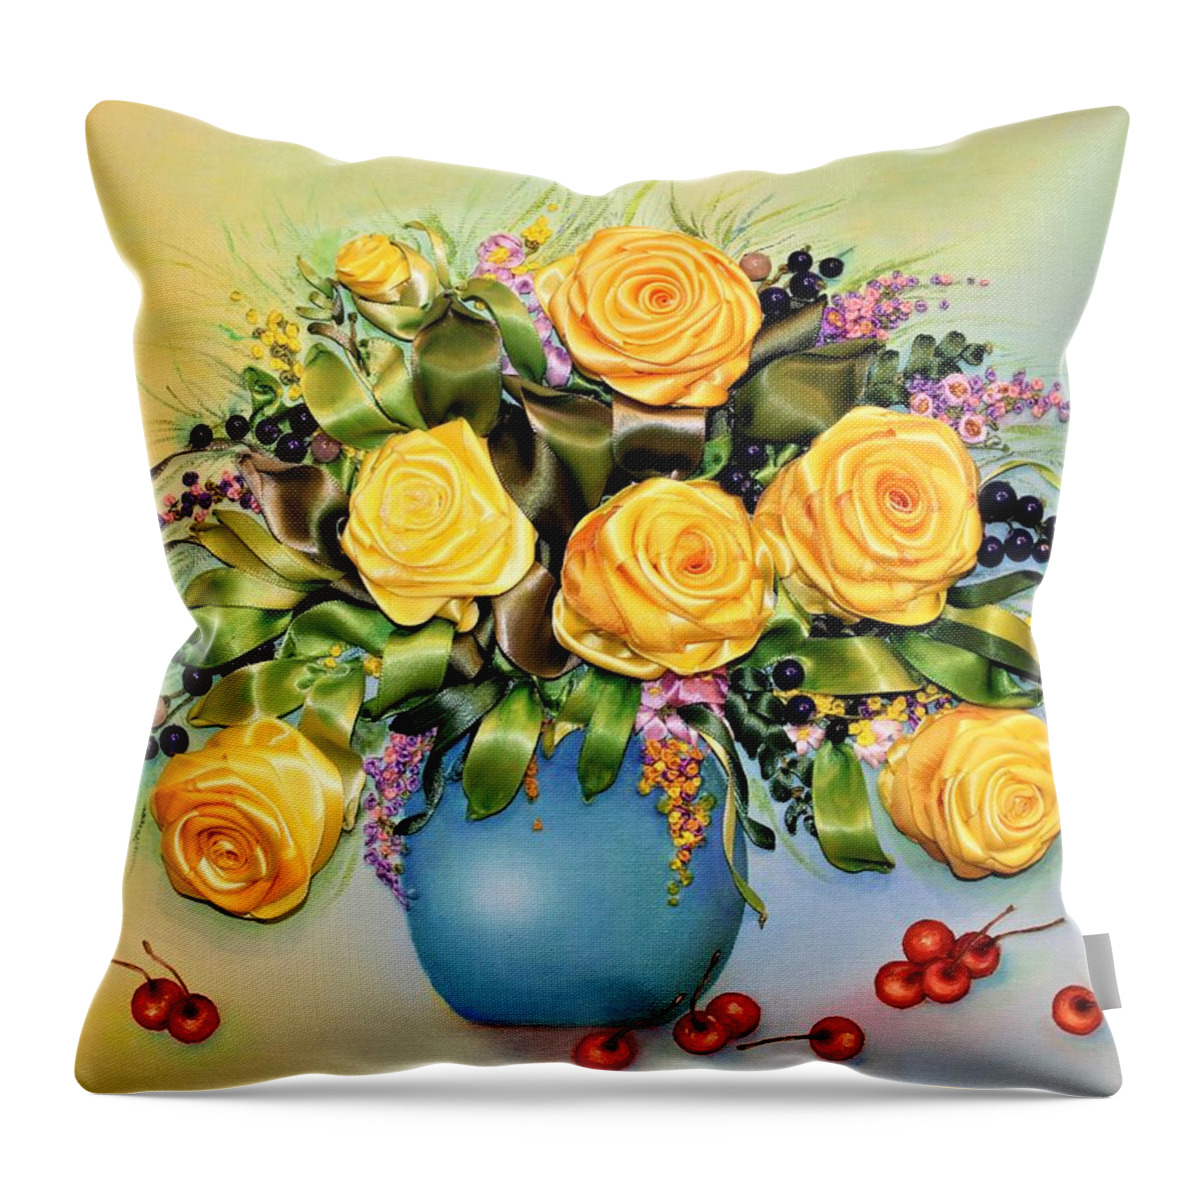 Wall Art Flowers Art Yellow Roses Red Berry Red Cherries Art Yellow Flowers Wall Décor Mixed Media Oil Painting & Ribbon Embroidery On Canvas Throw Pillow featuring the mixed media Yellow Roses by Tanya Harr